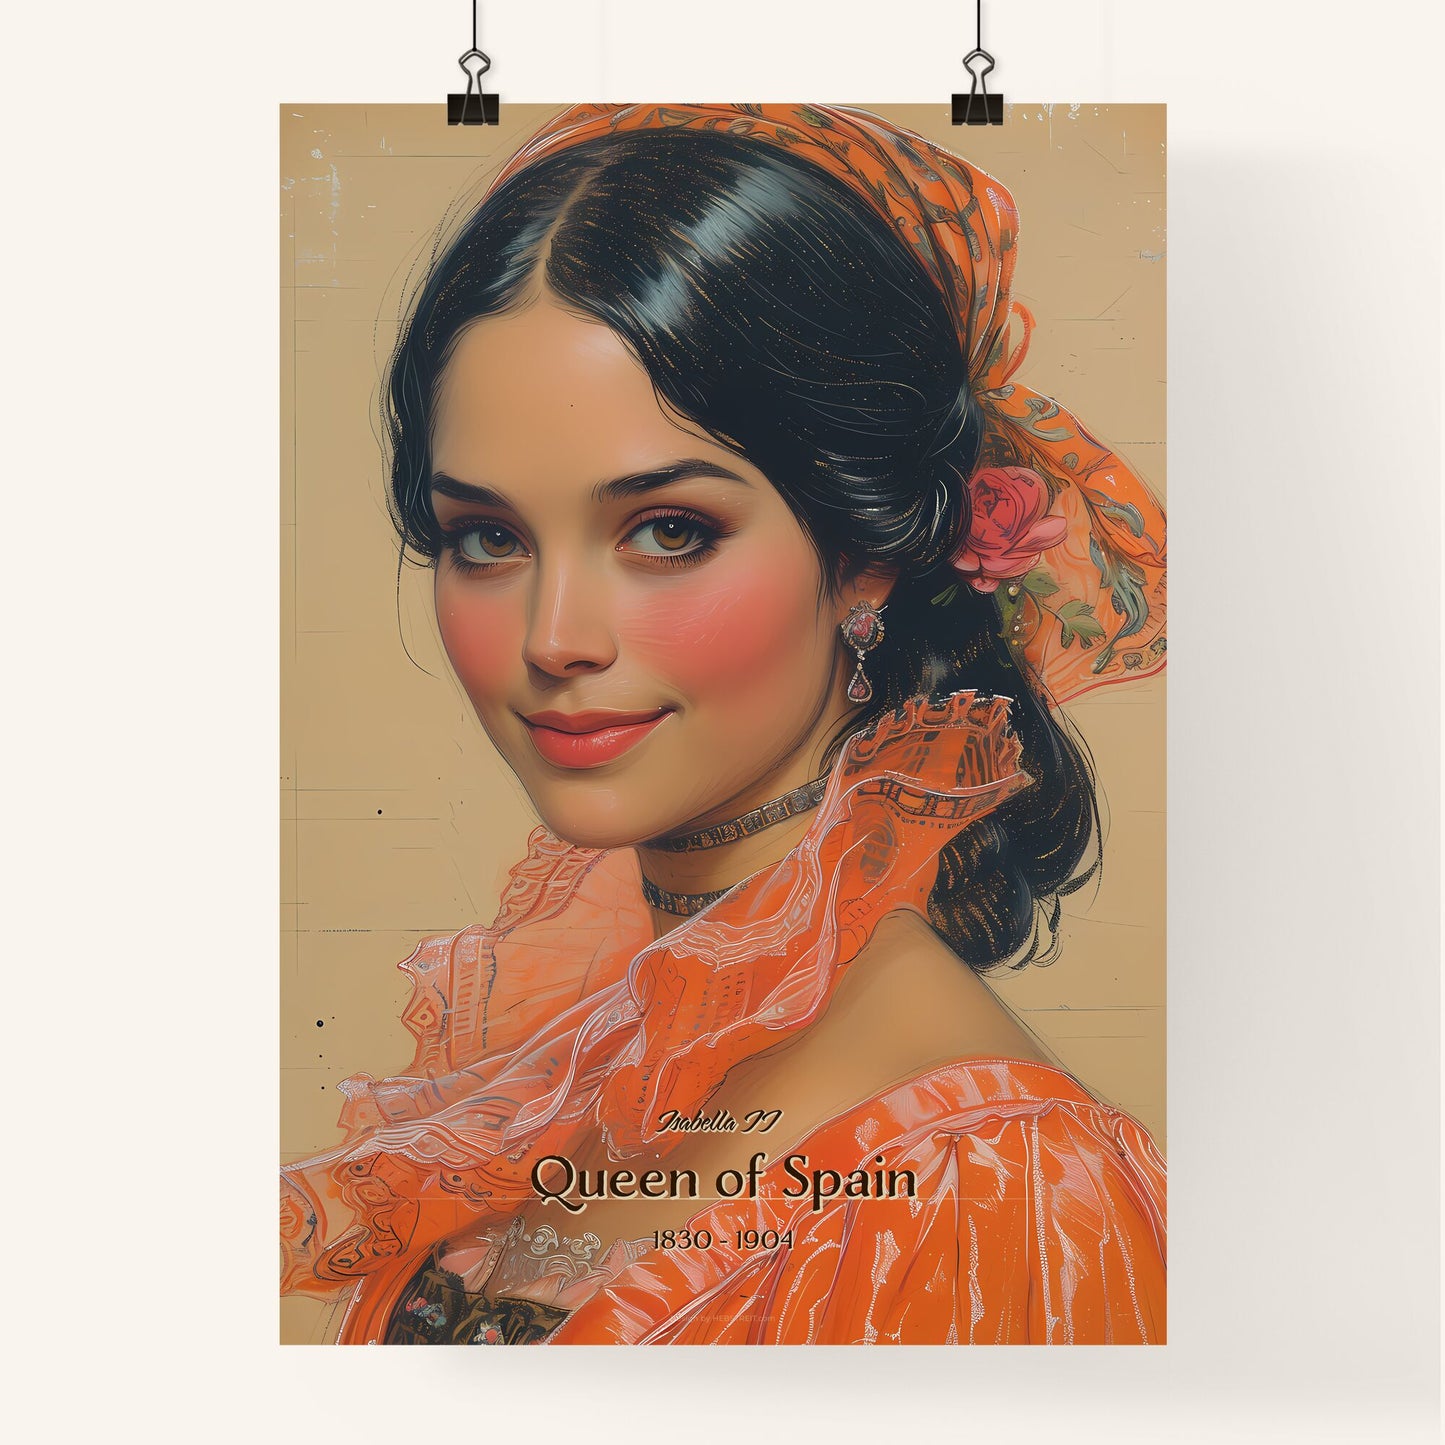 Isabella II, Queen of Spain, 1830 - 1904, A Poster of a woman with a flower in her hair Default Title